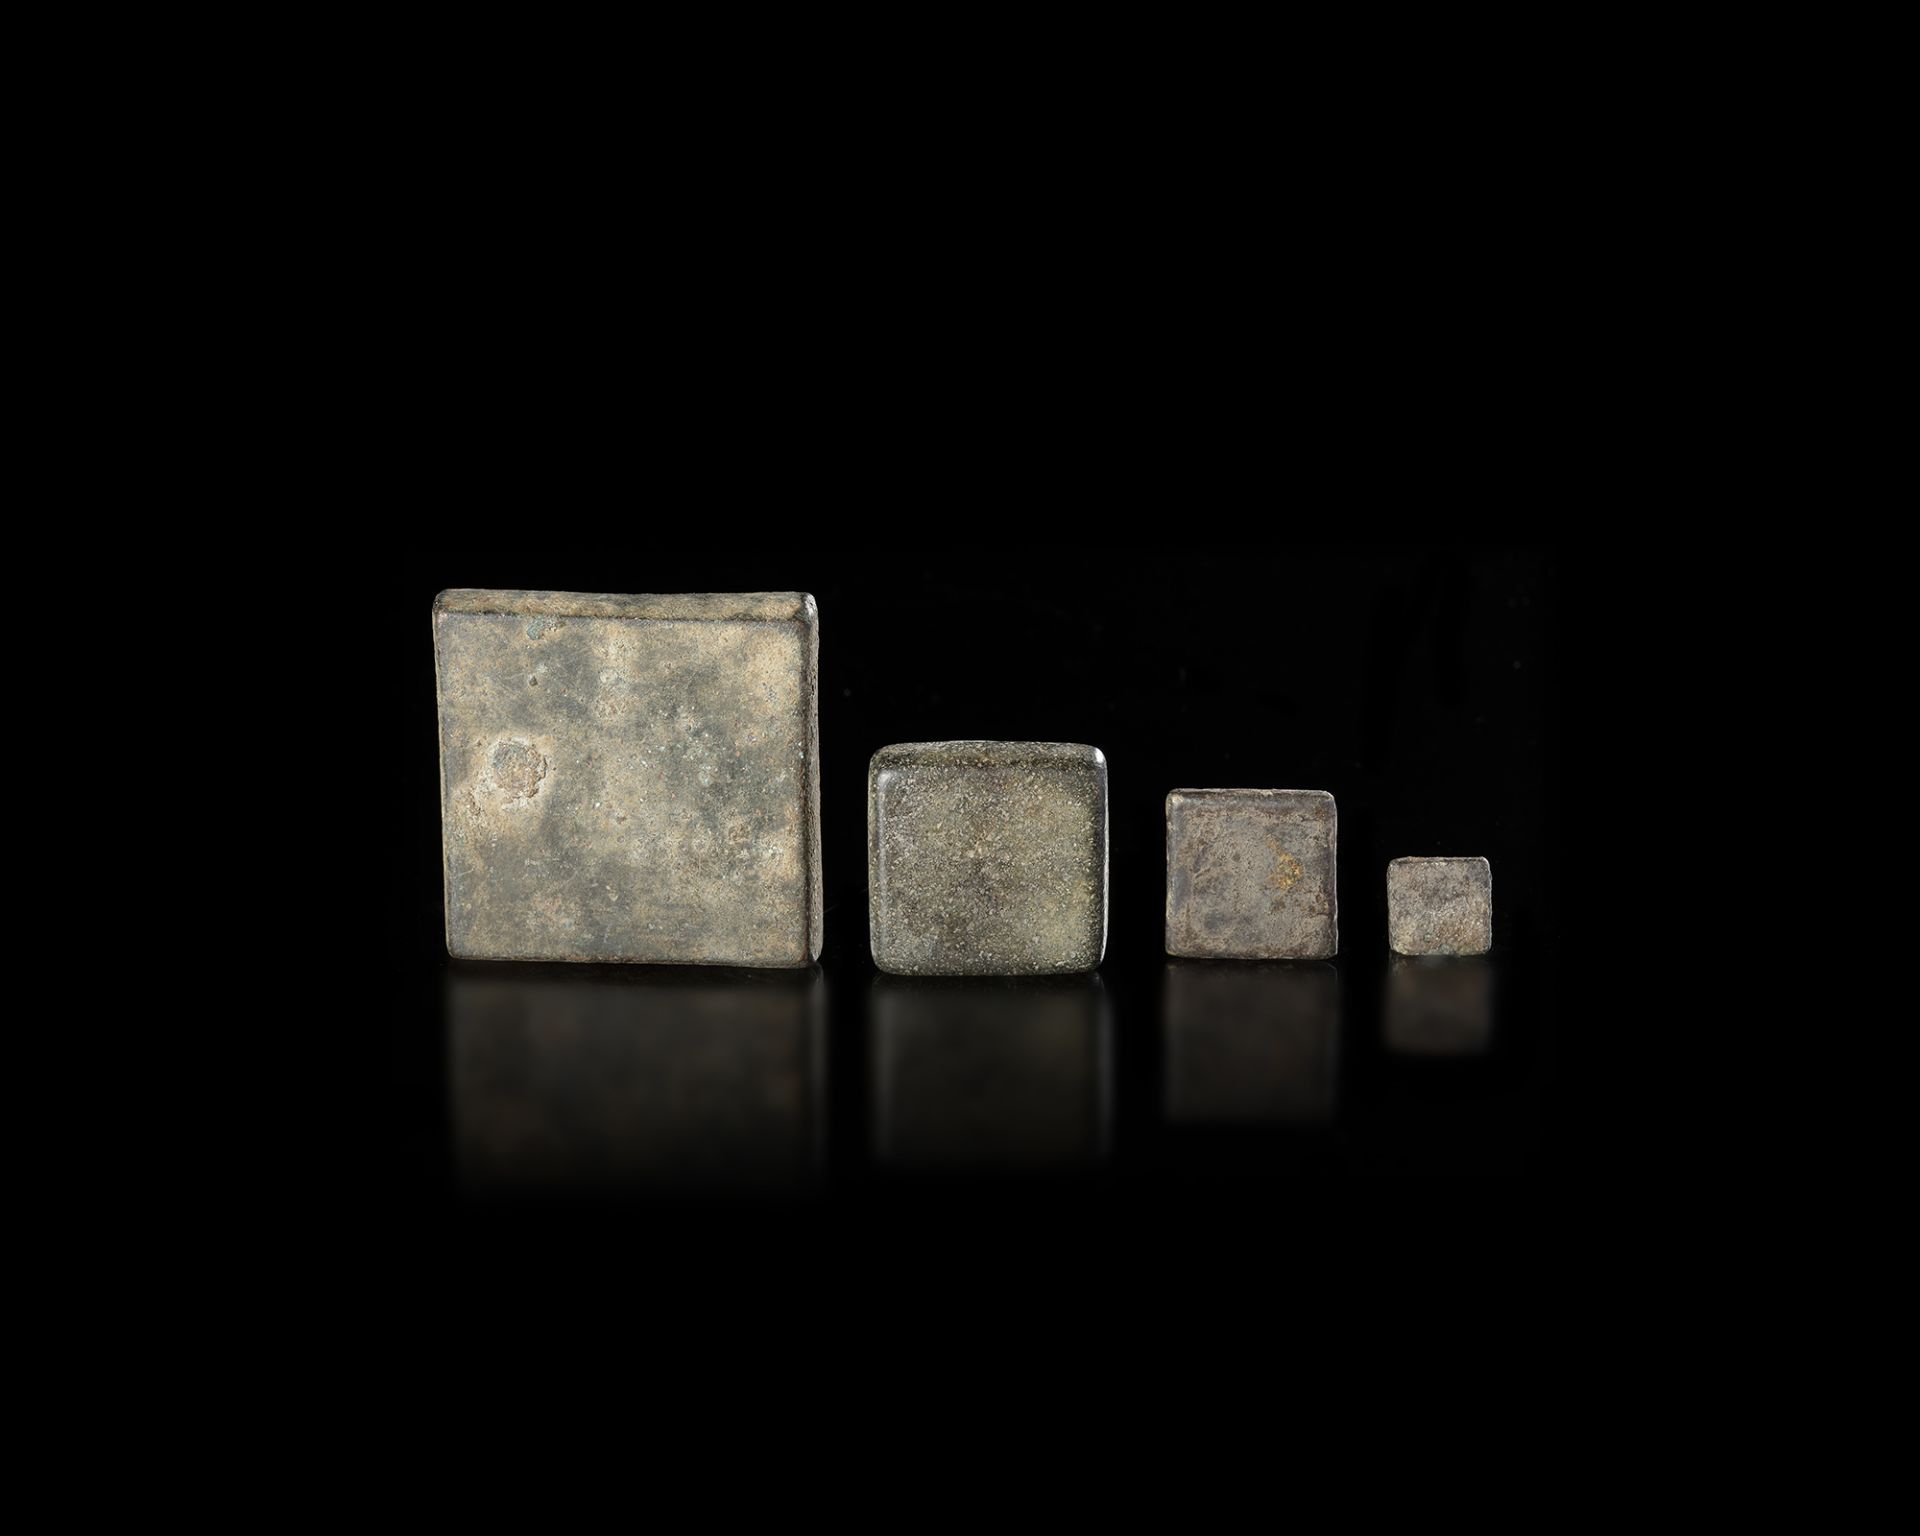 FOUR BYZANTINE COMMERCIAL WEIGHTS WITH SILVER INLAY, 5TH-7TH CENTURY AD - Image 3 of 4